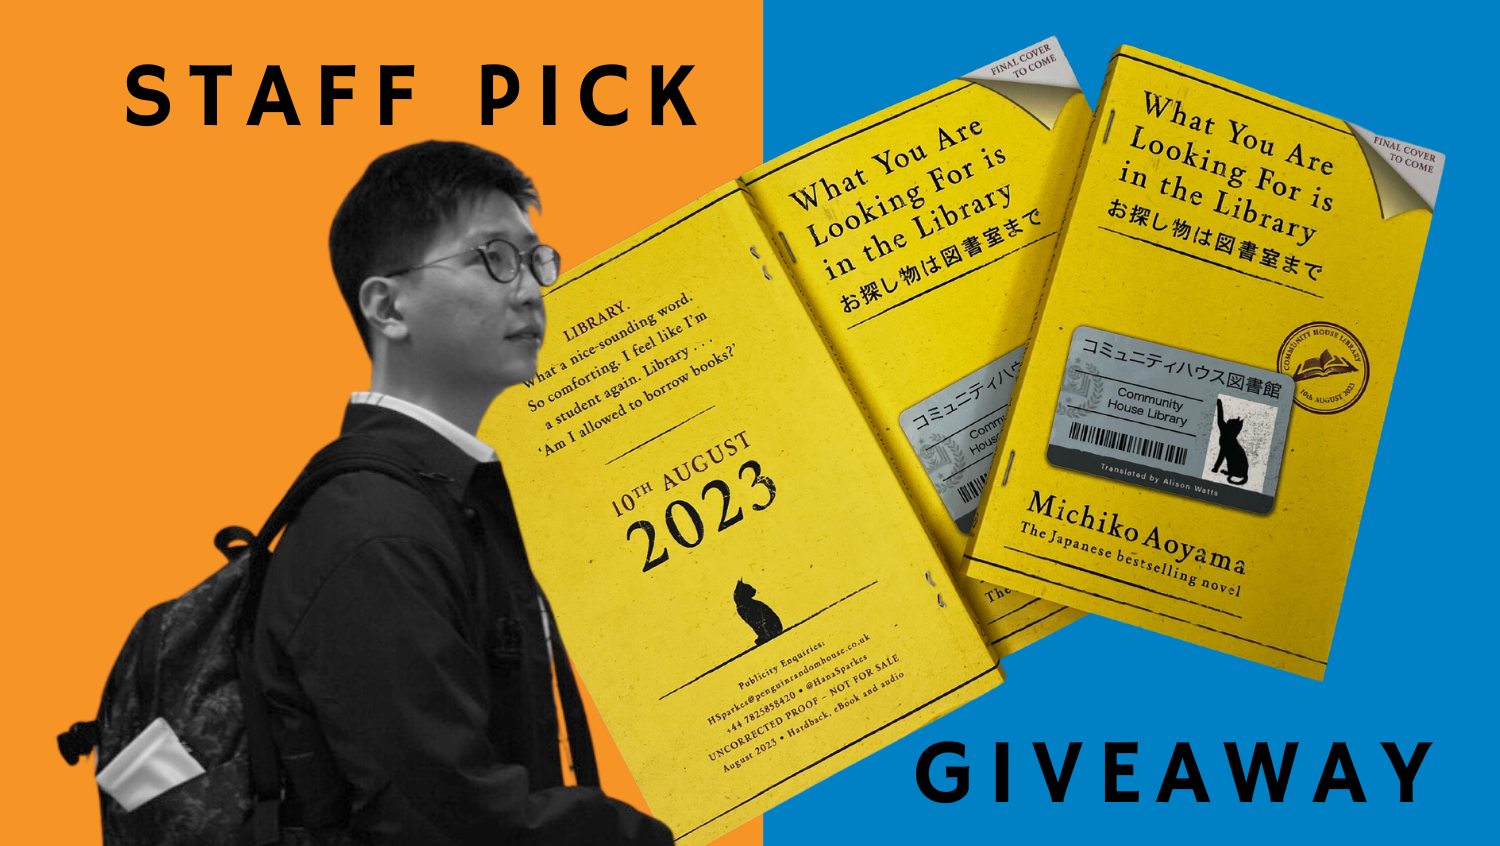 Staff Pick + Giveaway: What You're Looking For is in The Library